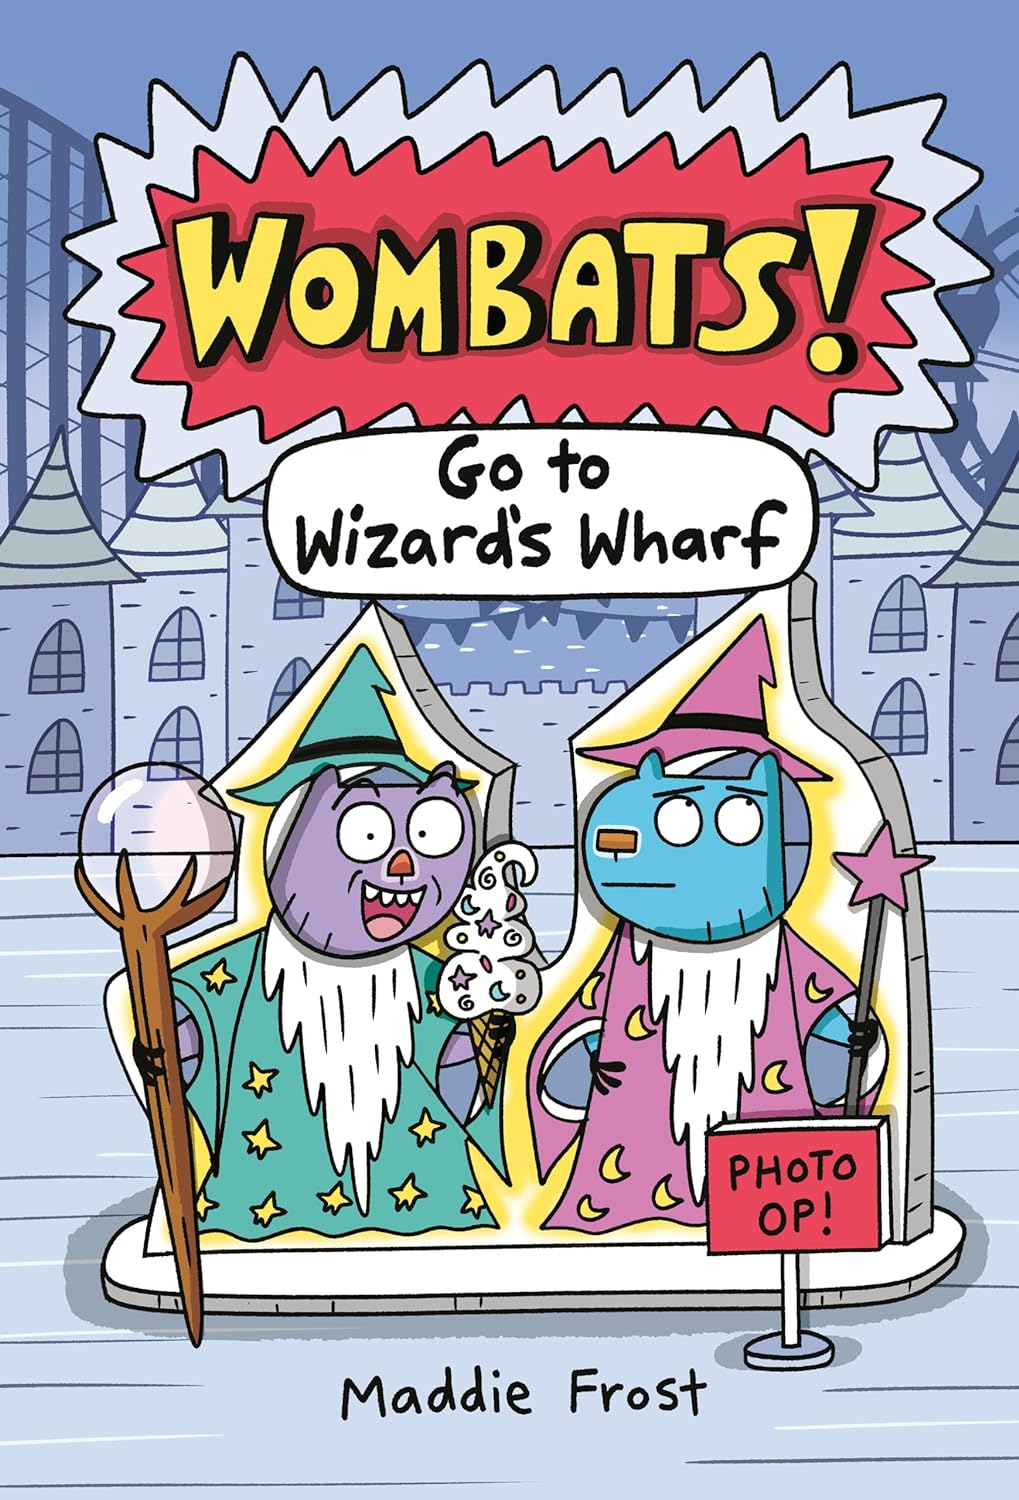 Wombats! Go to Wizard's Wharf